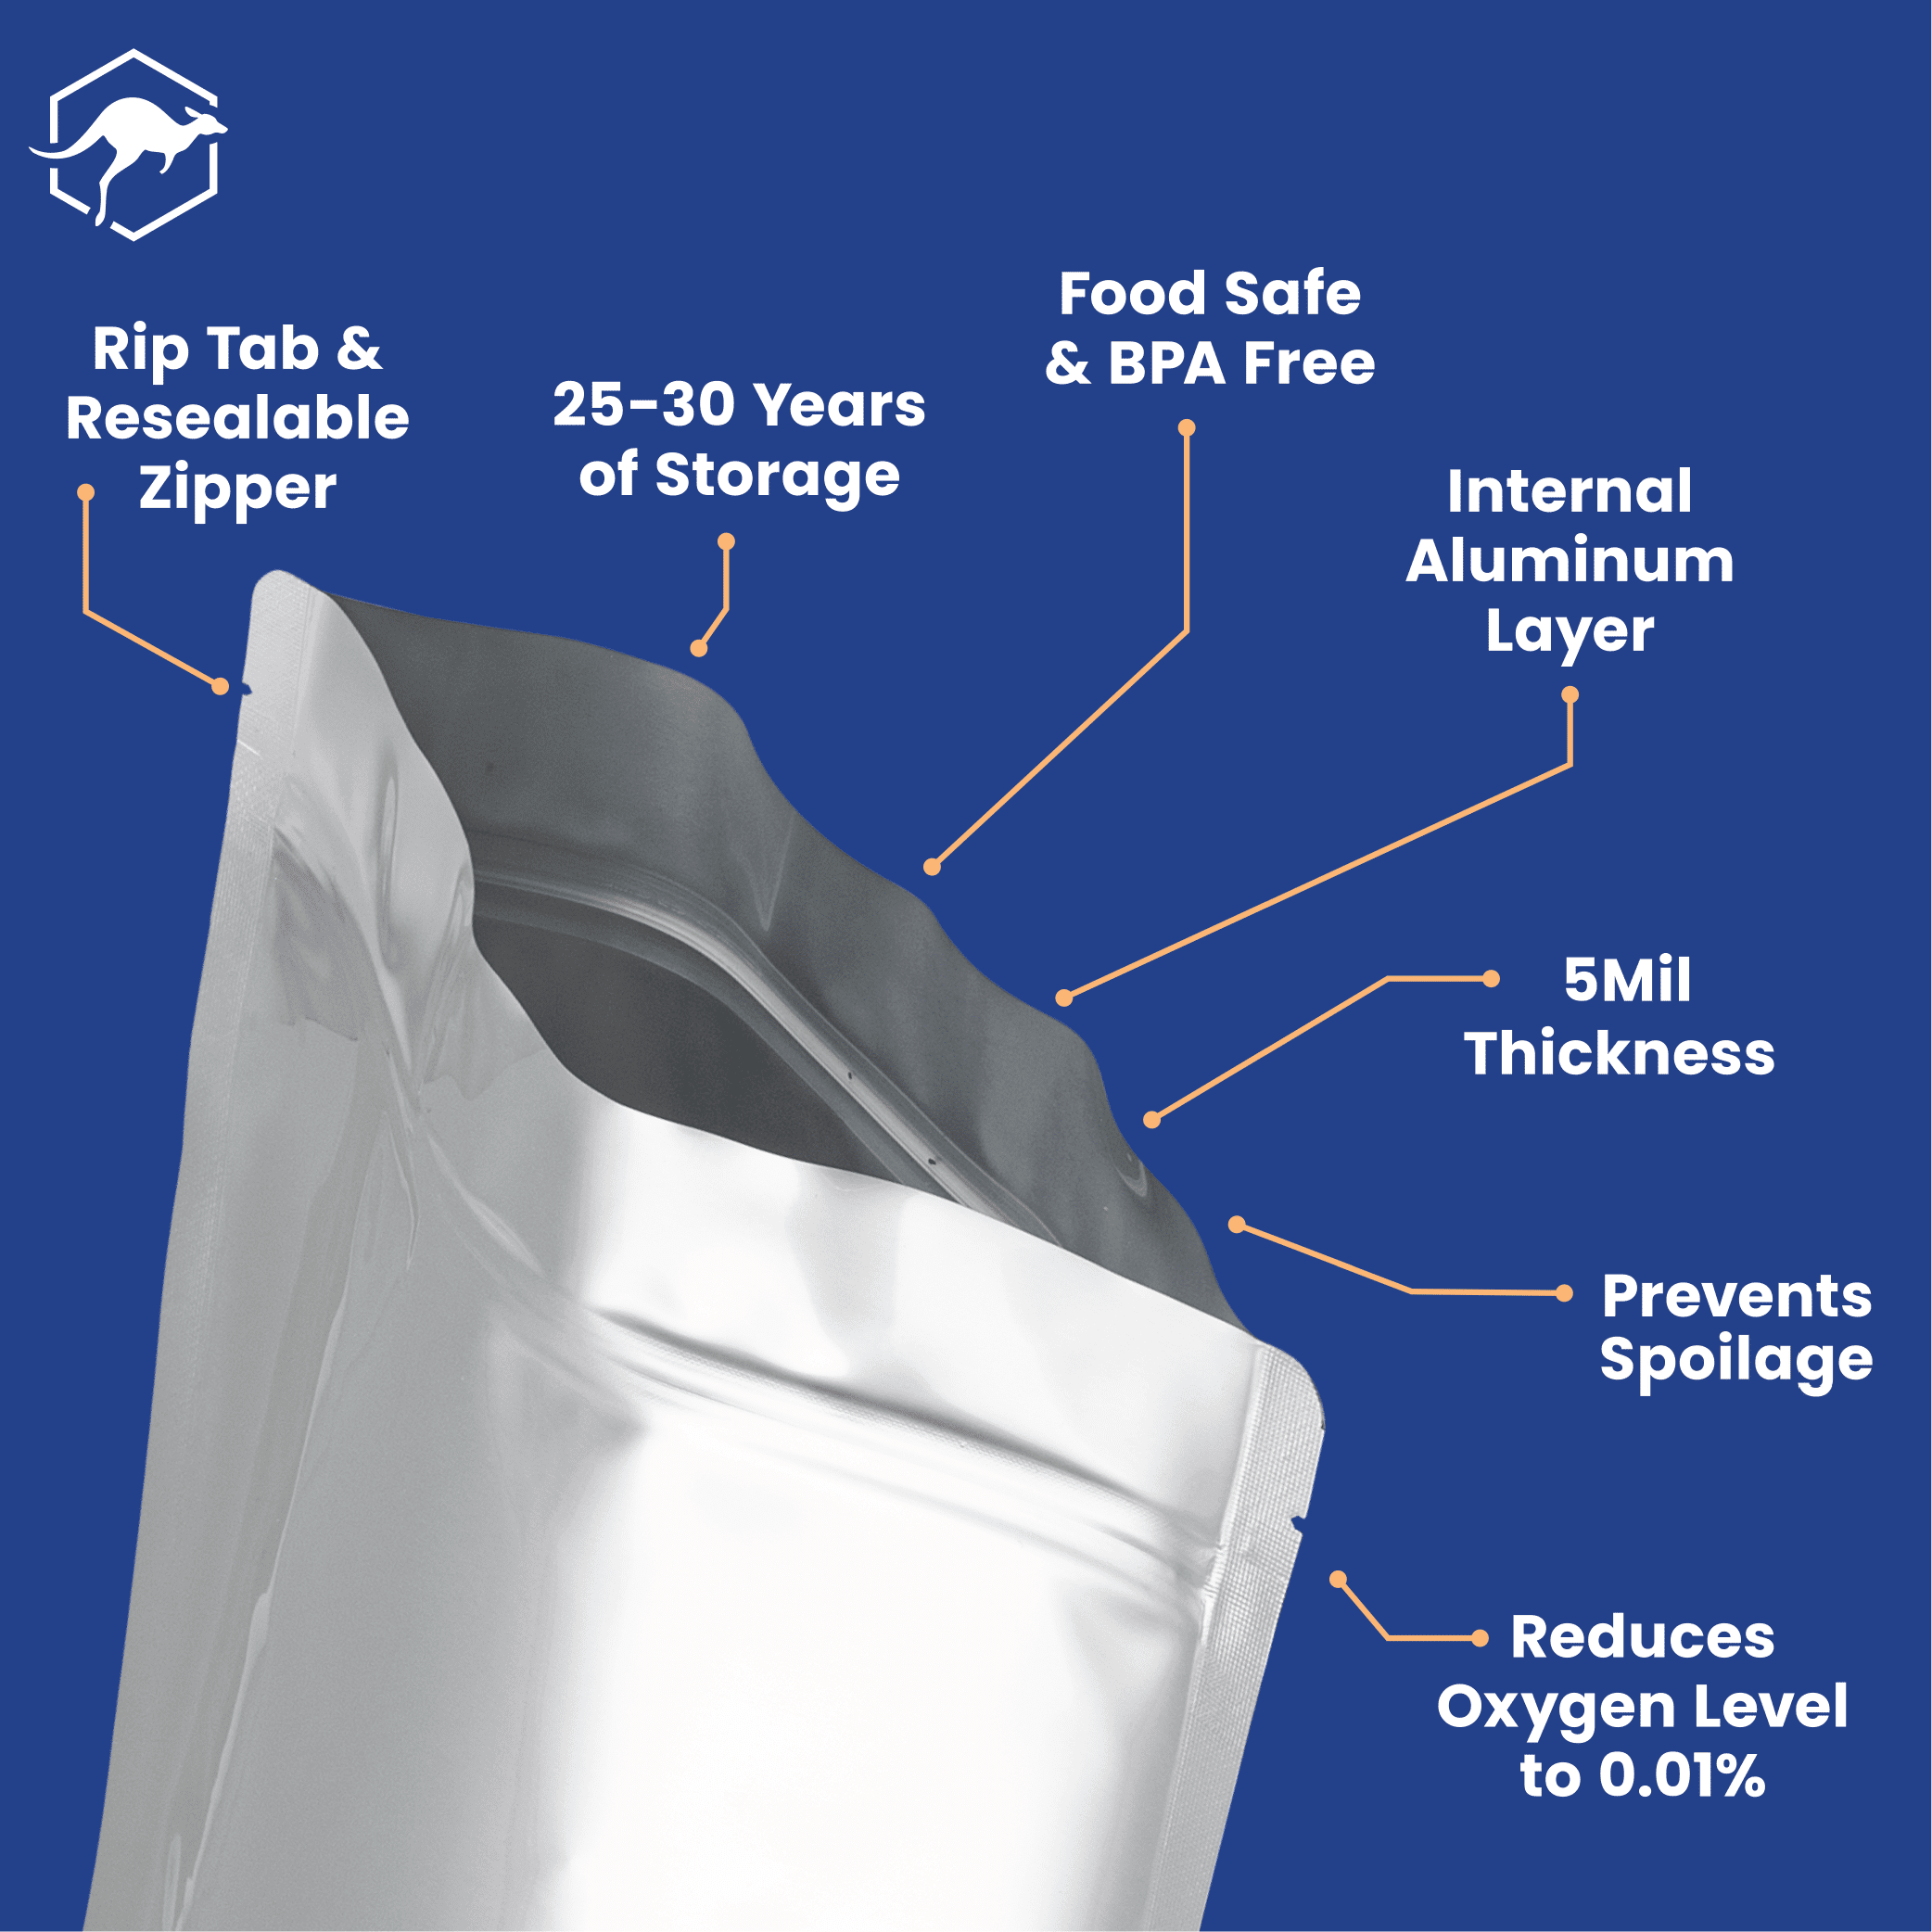 15 Mil 5 Gallon Mylar Bags for Food Storage with 2500cc Oxygen Absorbers -  55 Pack Mylar Bags 5 Gallon,1 Gallon,1 Quart 3 Size, 100 Pcs Labels and